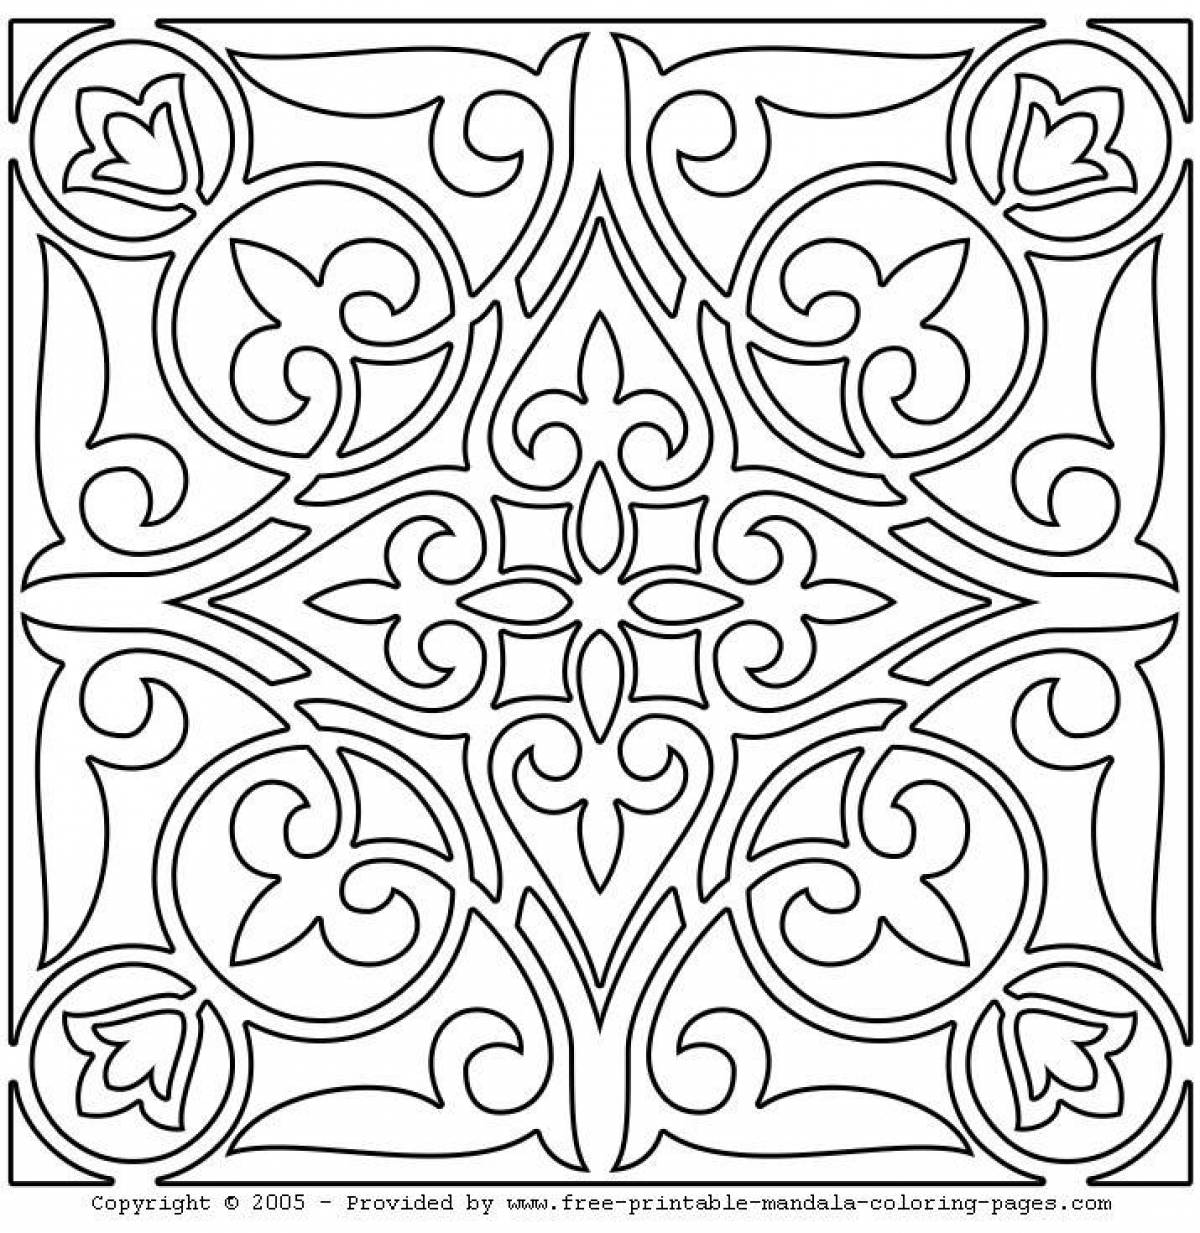 Bright ceramic tile coloring page